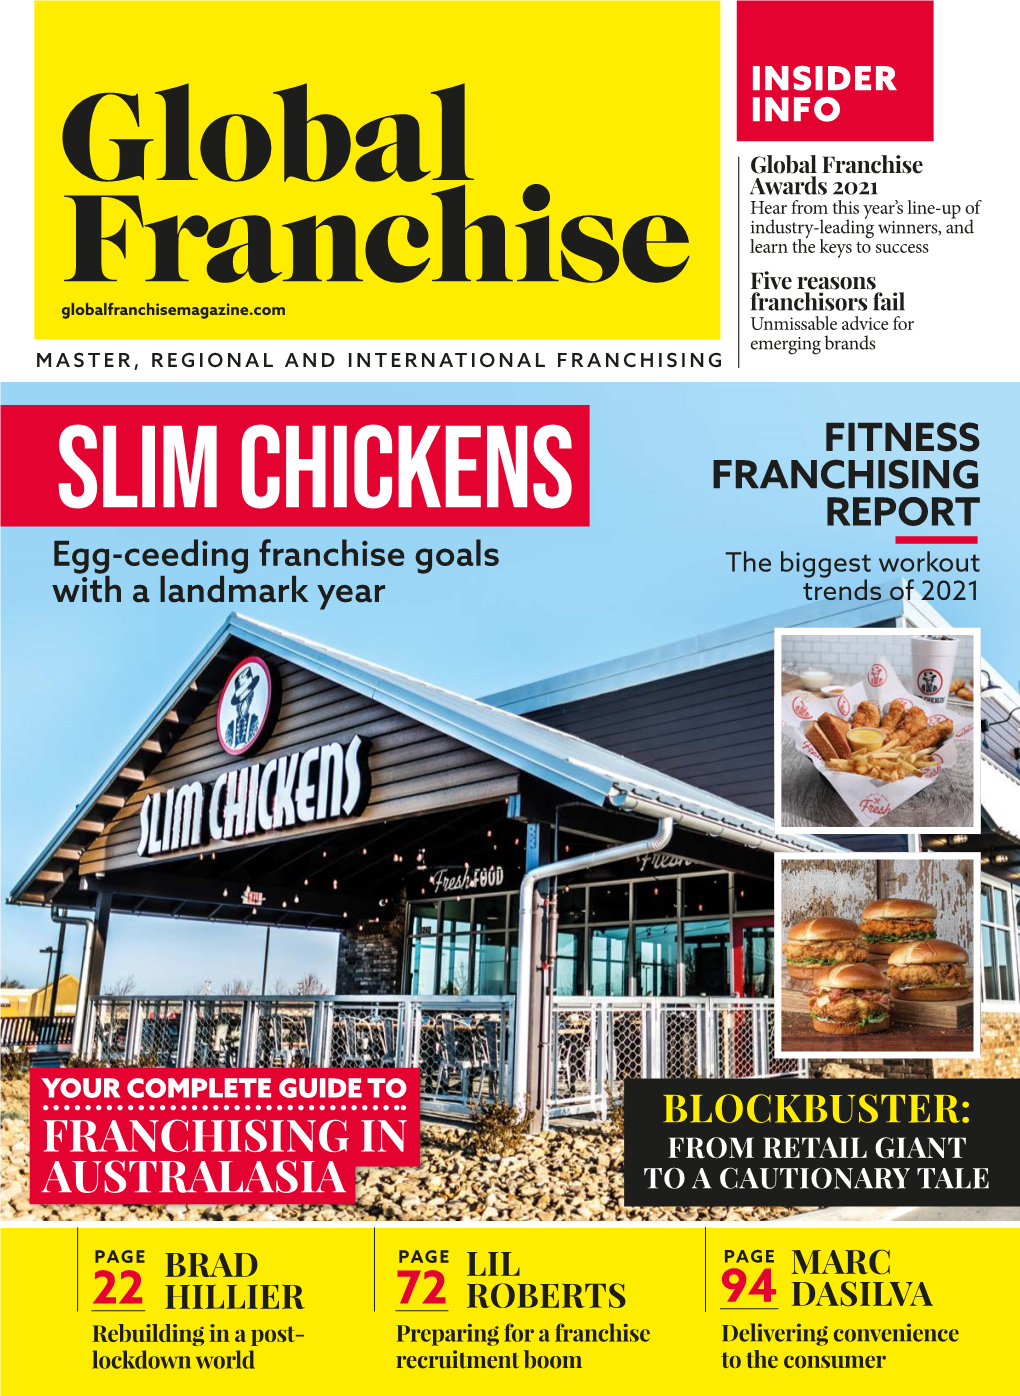 SLIM CHICKENS REPORT Egg-Ceeding Franchise Goals the Biggest Workout with a Landmark Year Trends of 2021